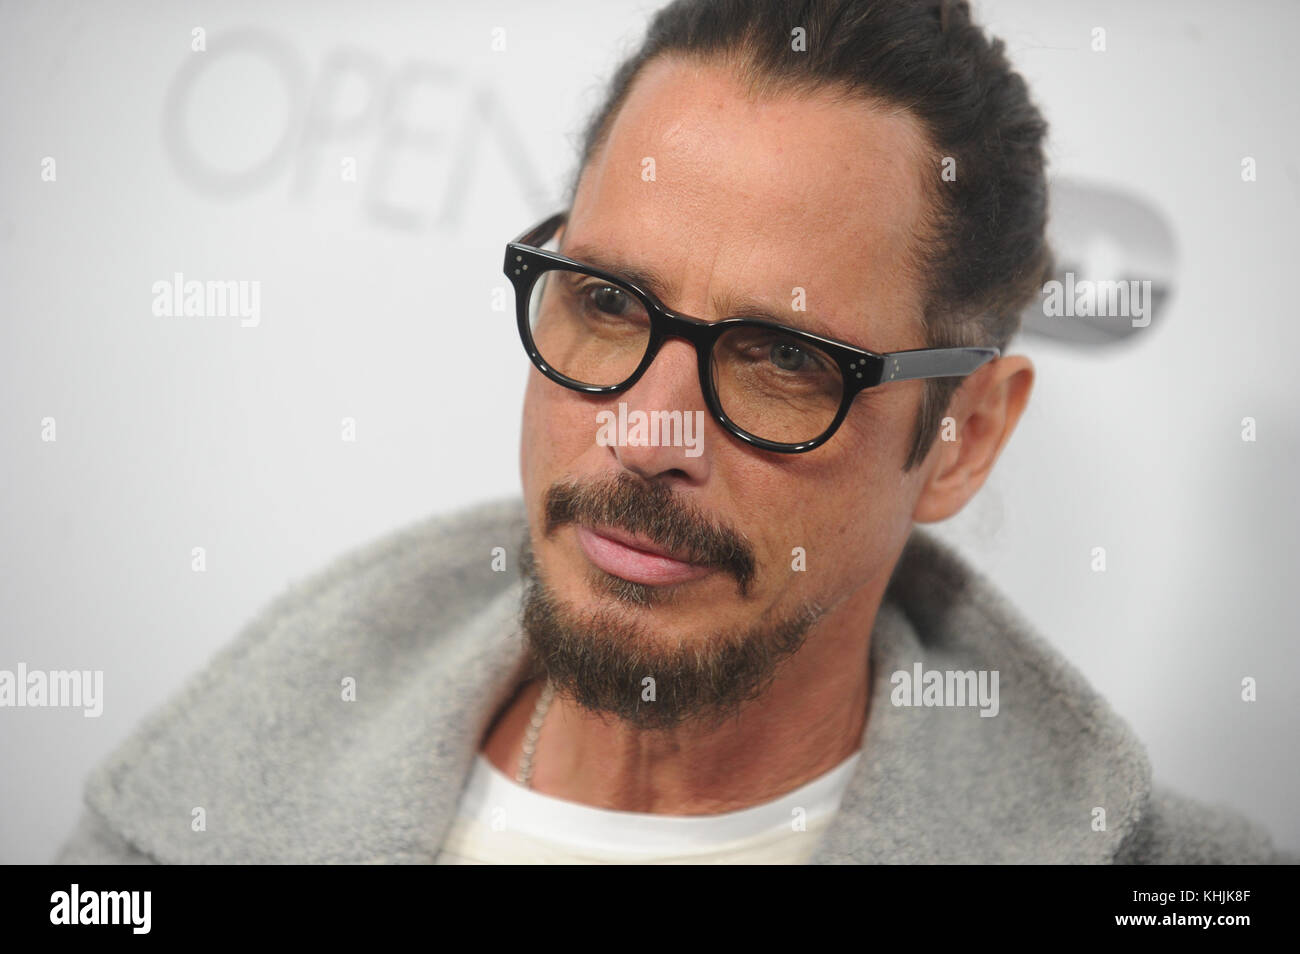 NEW YORK, NY - APRIL 18: Chris Cornell attend the New York Screening of 'The Promise' at The Paris Theatre on April 18, 2017 in New York City  People:  Chris Cornell  Transmission Ref:  MNC1 Stock Photo